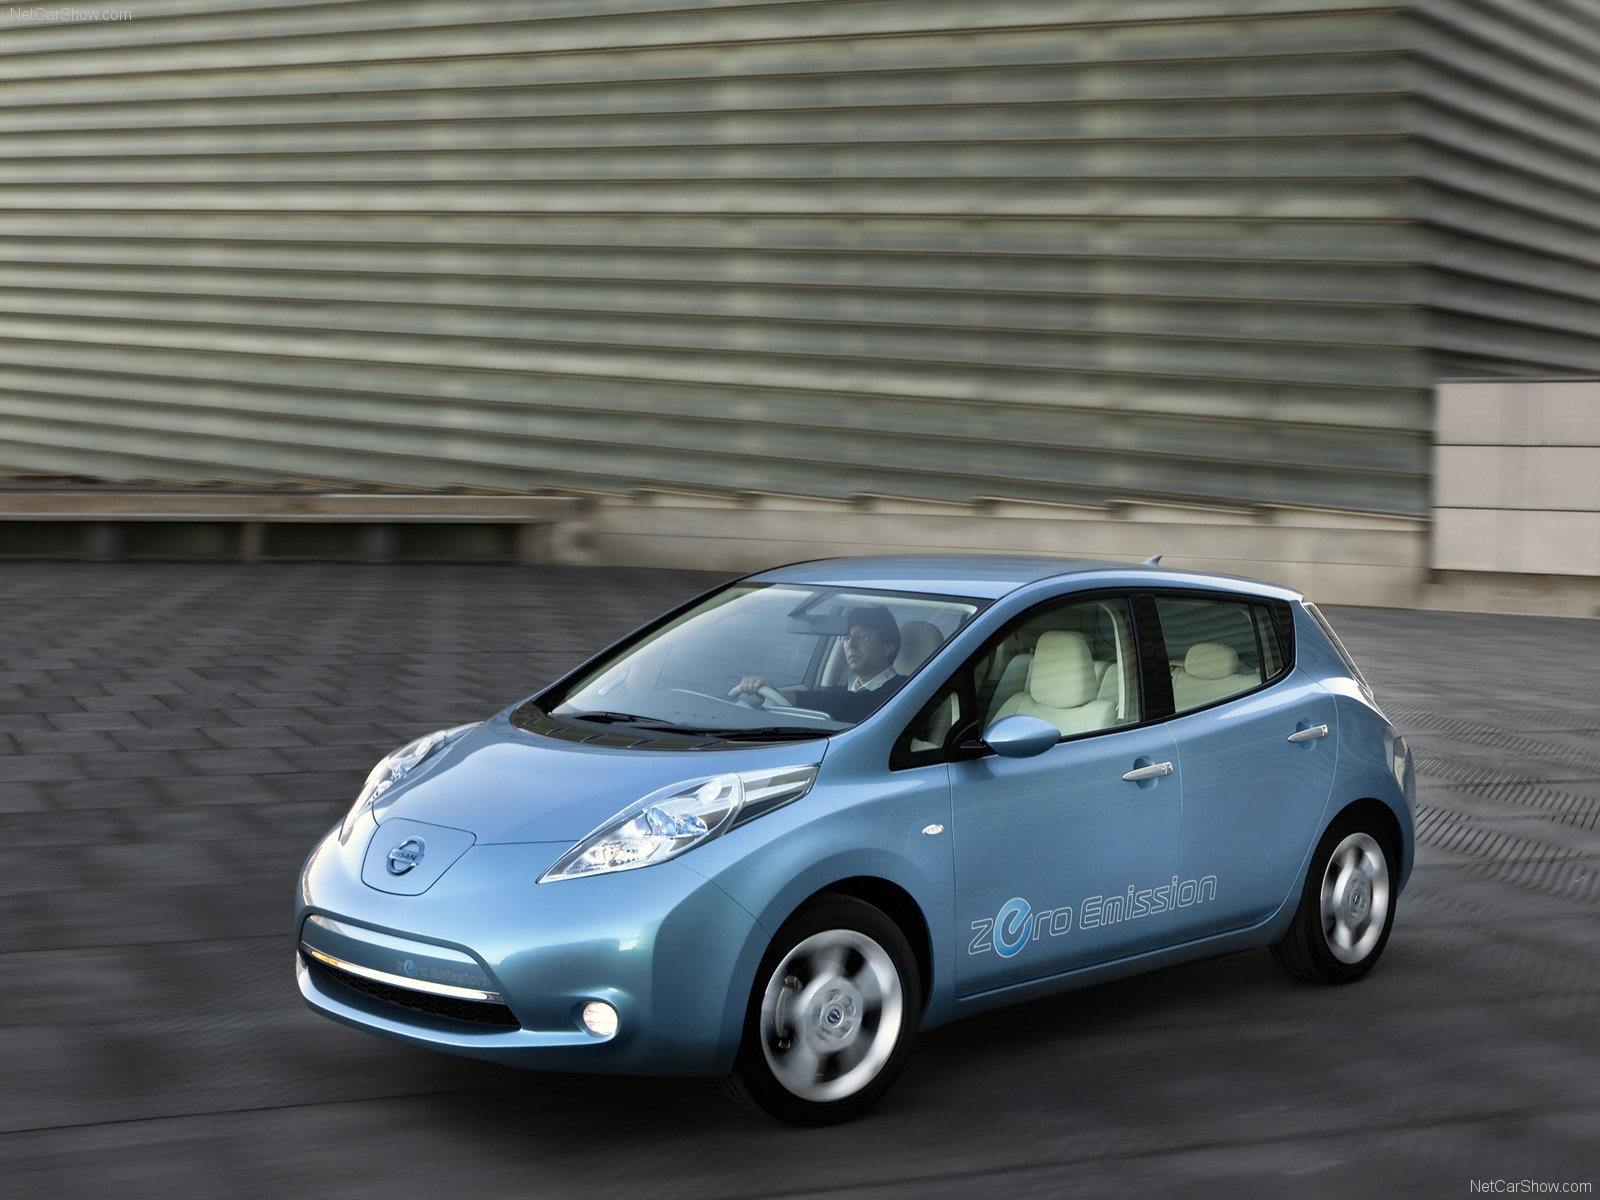 Nissan leaf picture gallery #7